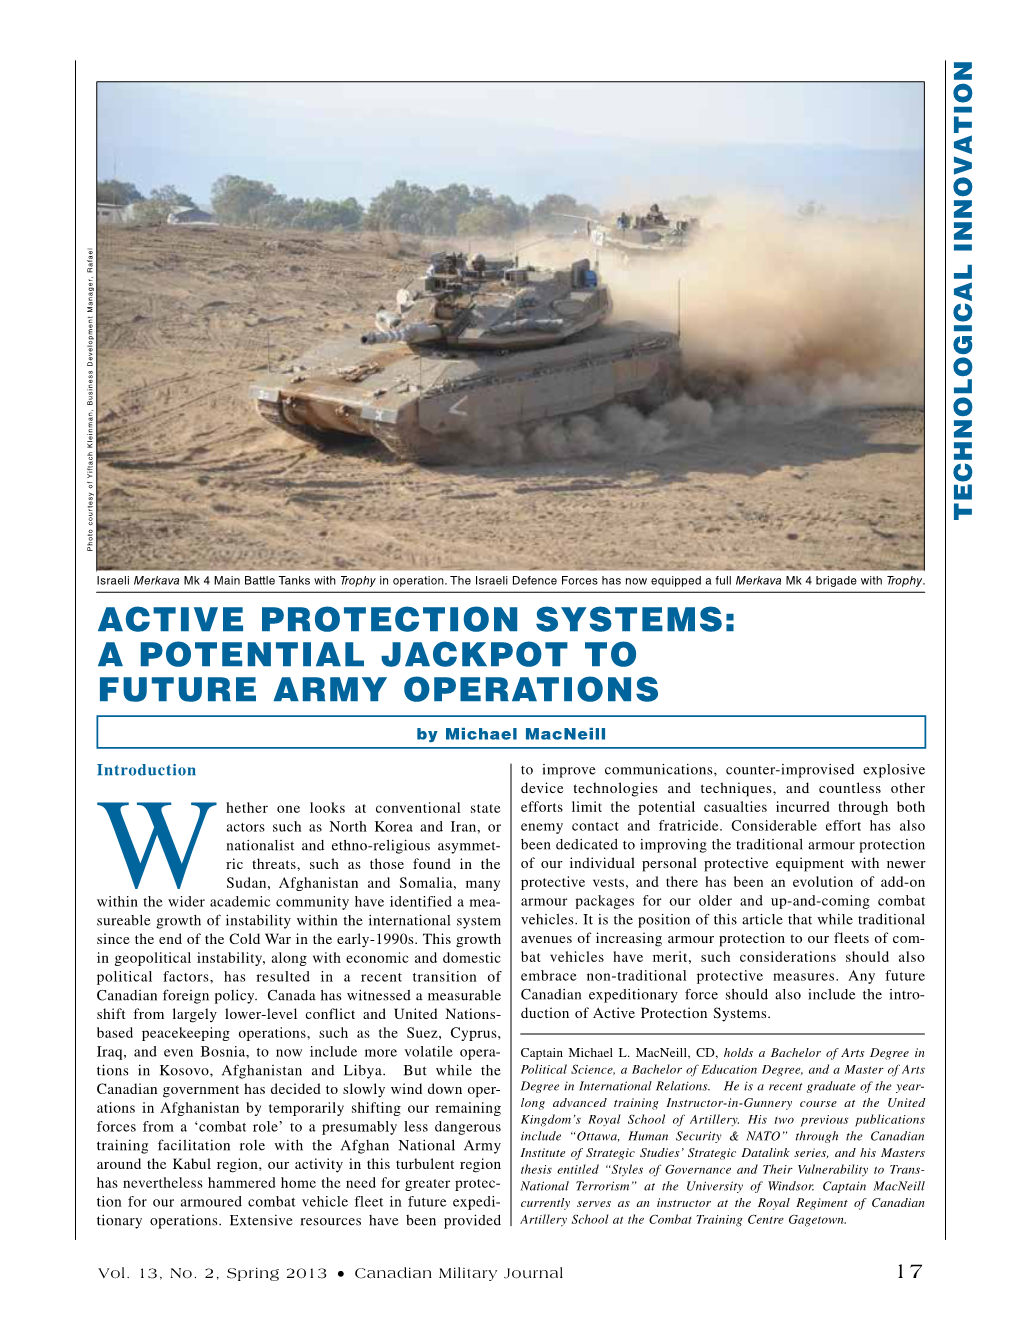 Active Protection Systems: a Potential Jackpot to Future Army Operations